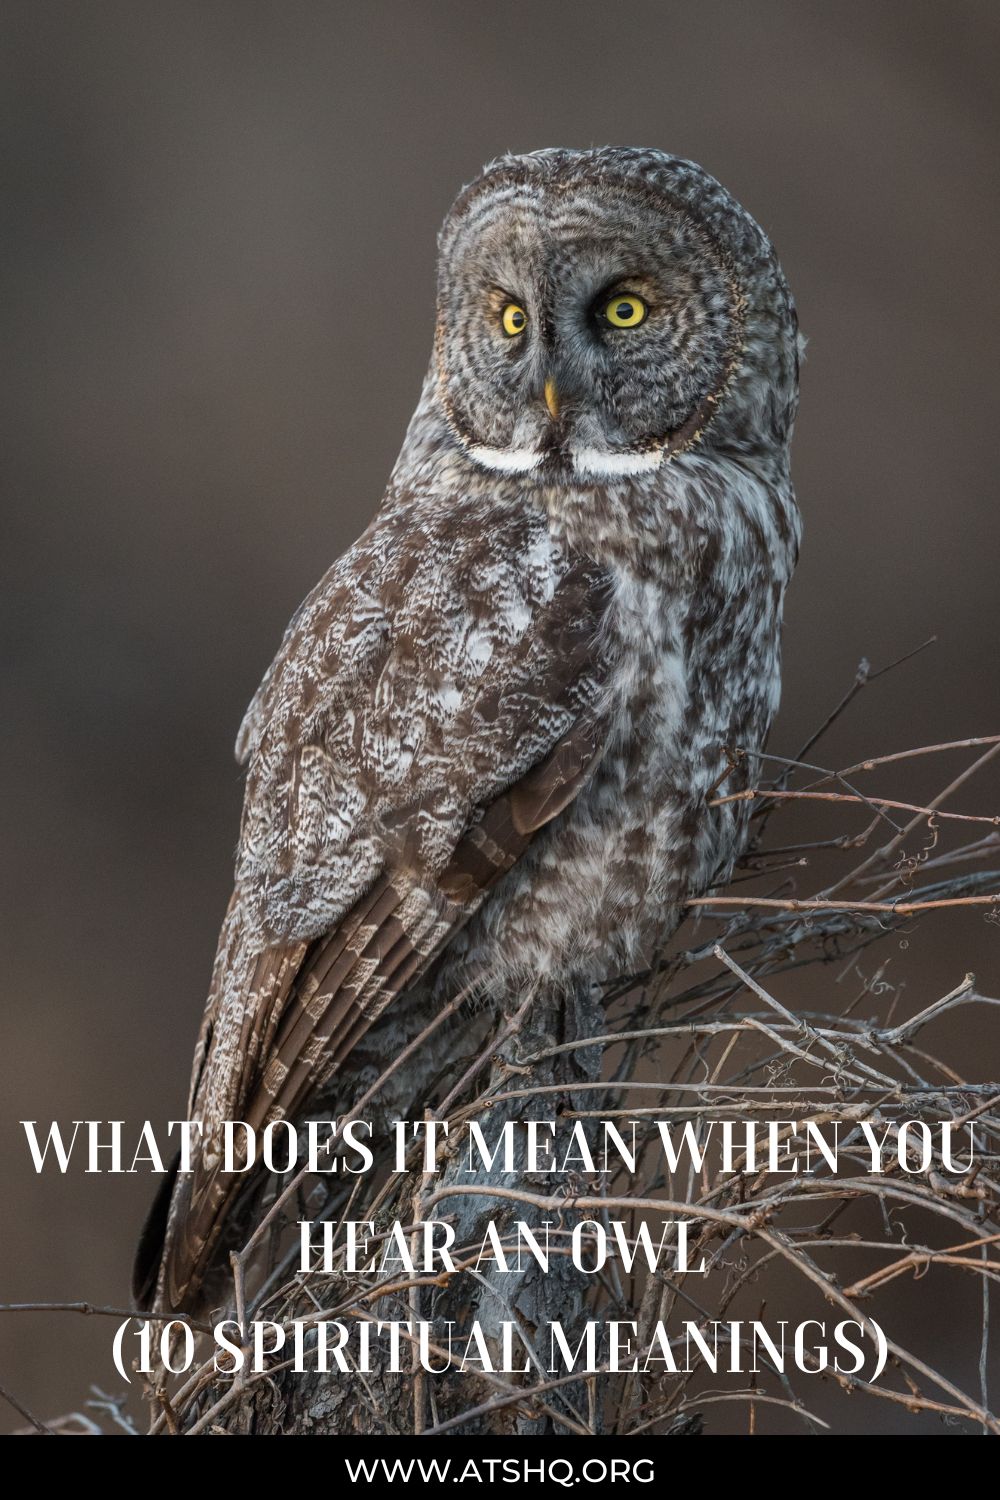 What does it mean when you hear an owl?